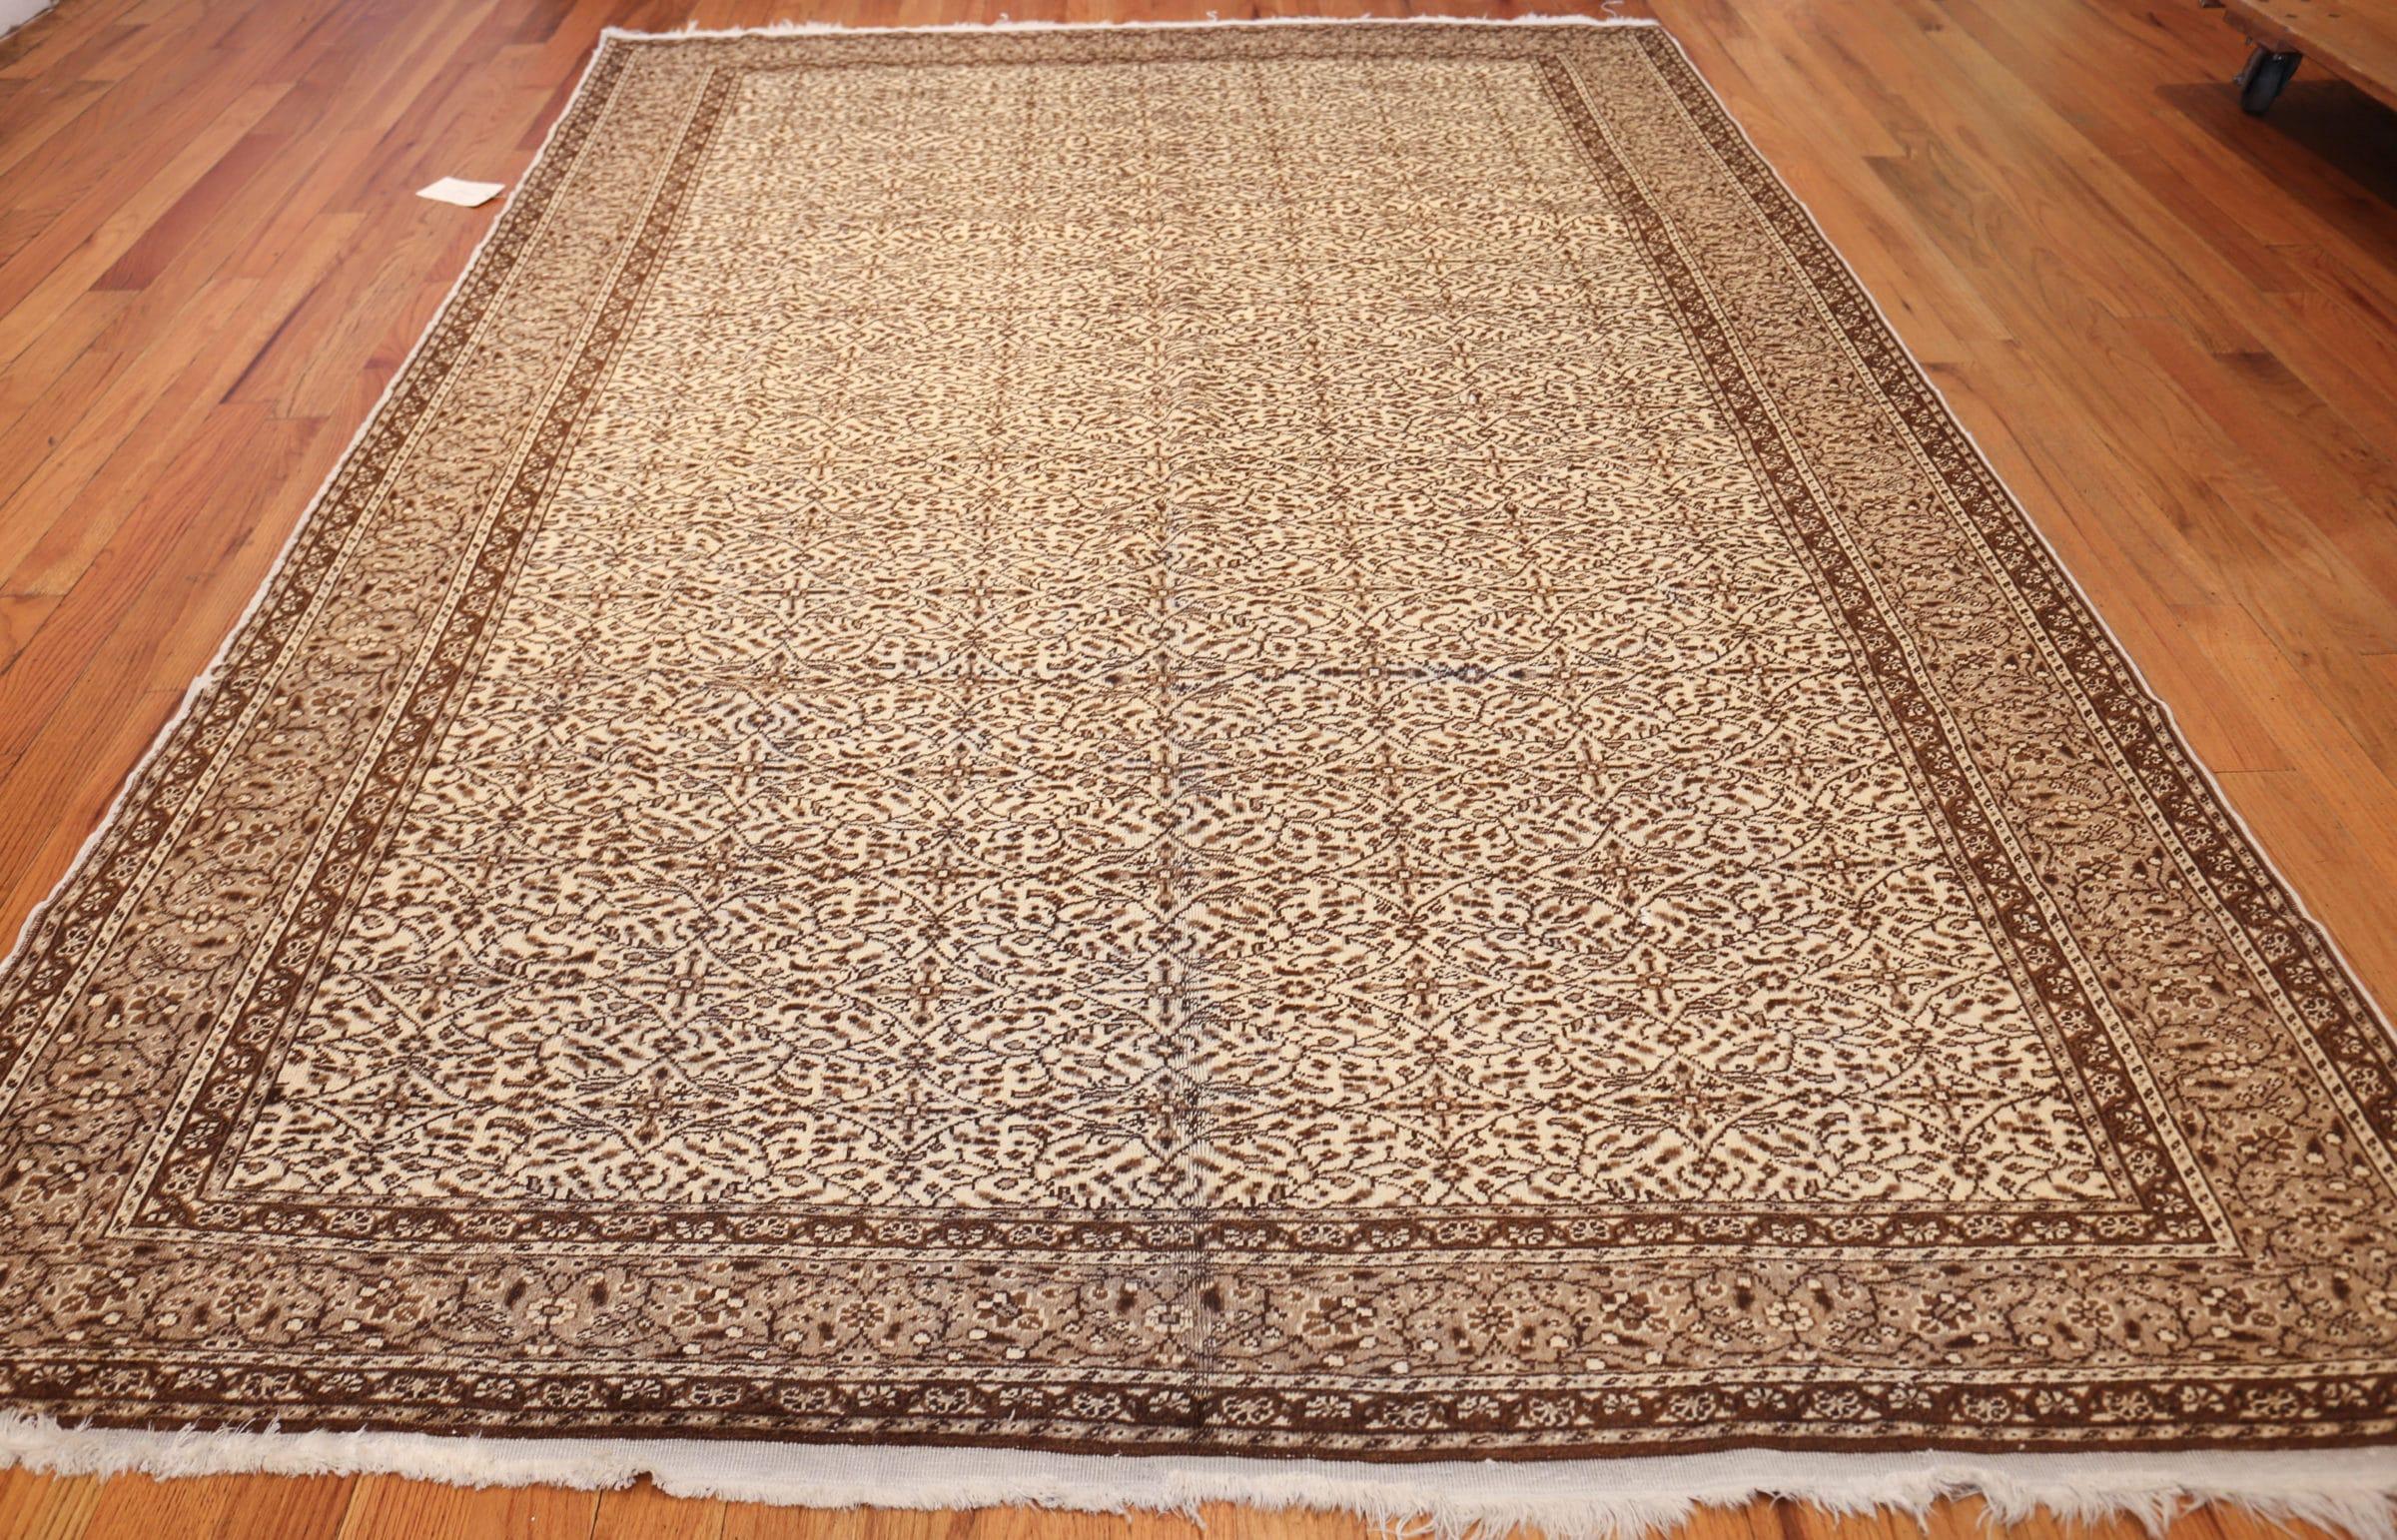 Beautiful fine and decorative antique Turkish Sivas rug, country of origin / rug type: Turkish rug, circa 1920's. Size: 6 ft 8 in x 9 ft 7 in (2.03 m x 2.92 m)

Featuring beautiful linework and elegant stitching, this breathtaking Sivas rug is a